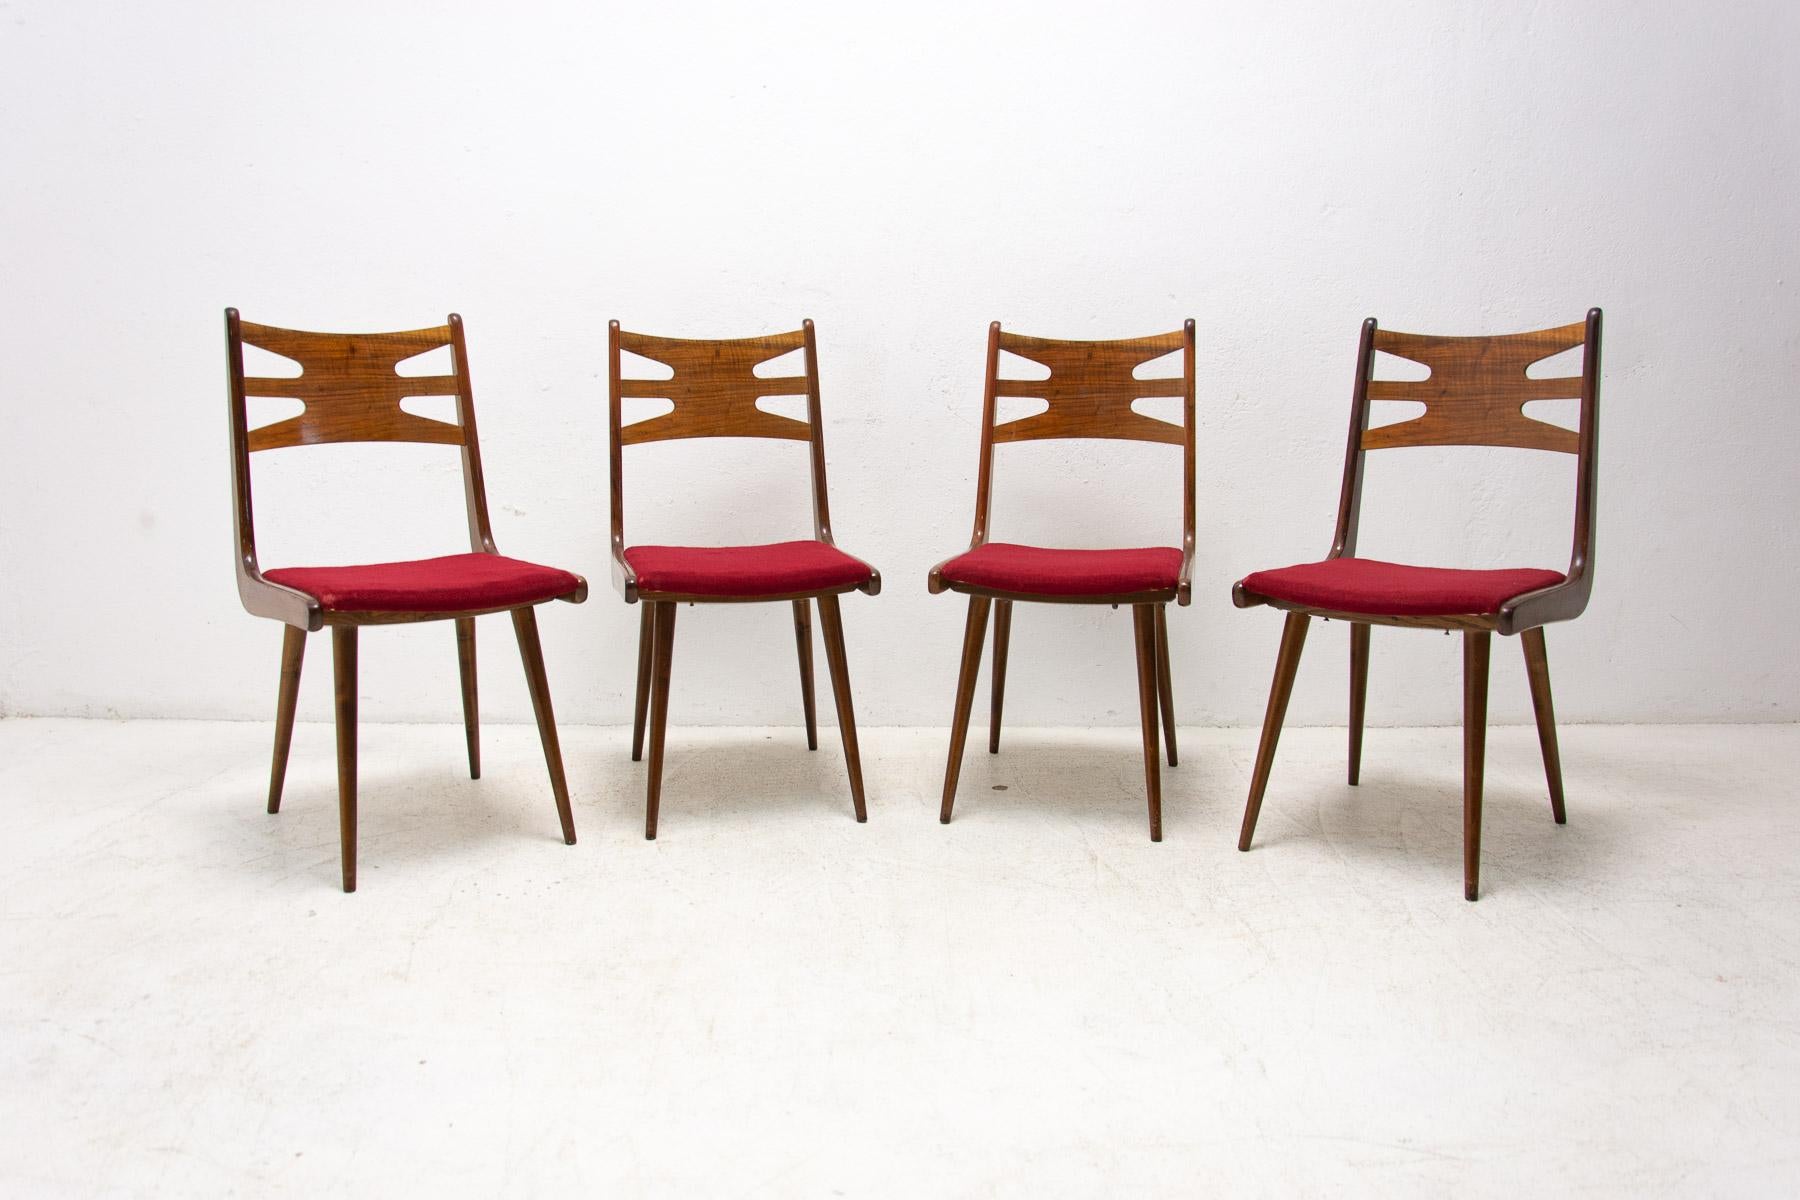 These beautiful Vintage dining chairs were made in the former Czechoslovakia in the 1970s.

It was most likely be TON company – the successor of Thonet in Czechoslovakia

They features original crimson fabric and walnut wood structure. The